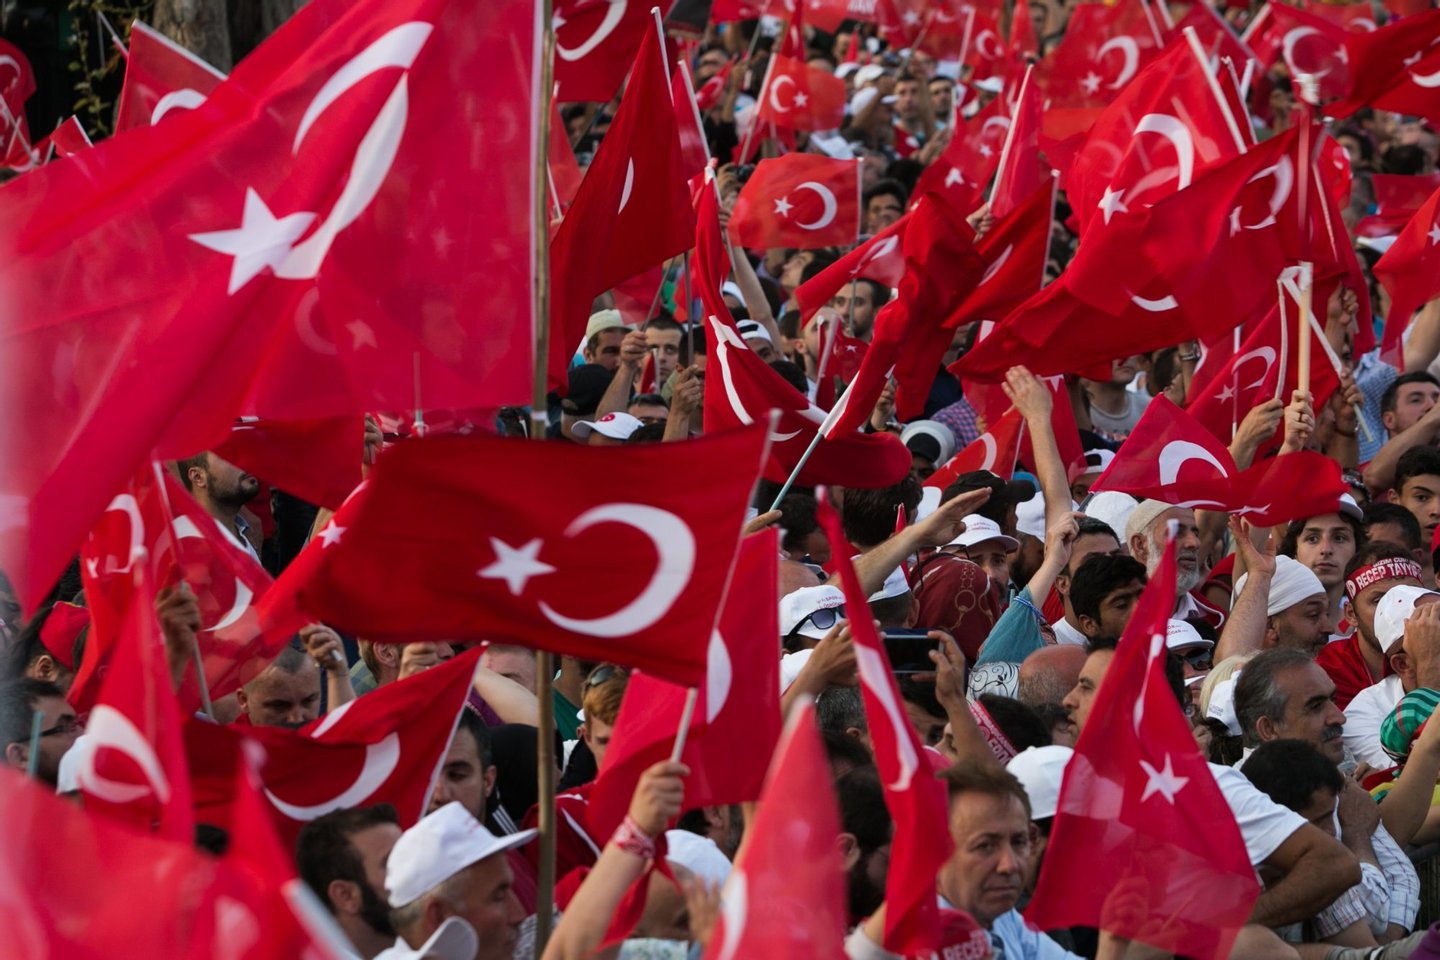 Supporters wave Turkish national flags as Turkish President (unseen) arrives during a rally near his house in Istanbul on July 16, 2016 after Turkish authorities wrested back control of the Ataturk airport.  President Recep Tayyip Erdogan urged Turks to remain on the streets on July 16, 2016, as his forces regained control after a spectacular coup bid by discontented soldiers that claimed more than 250 lives. Describing the attempted coup as a "black stain" on Turkey's democracy, Yildirim said that 161 people had been killed in the night of violence and 1,440 wounded. / AFP / GURCAN OZTURK        (Photo credit should read GURCAN OZTURK/AFP/Getty Images)